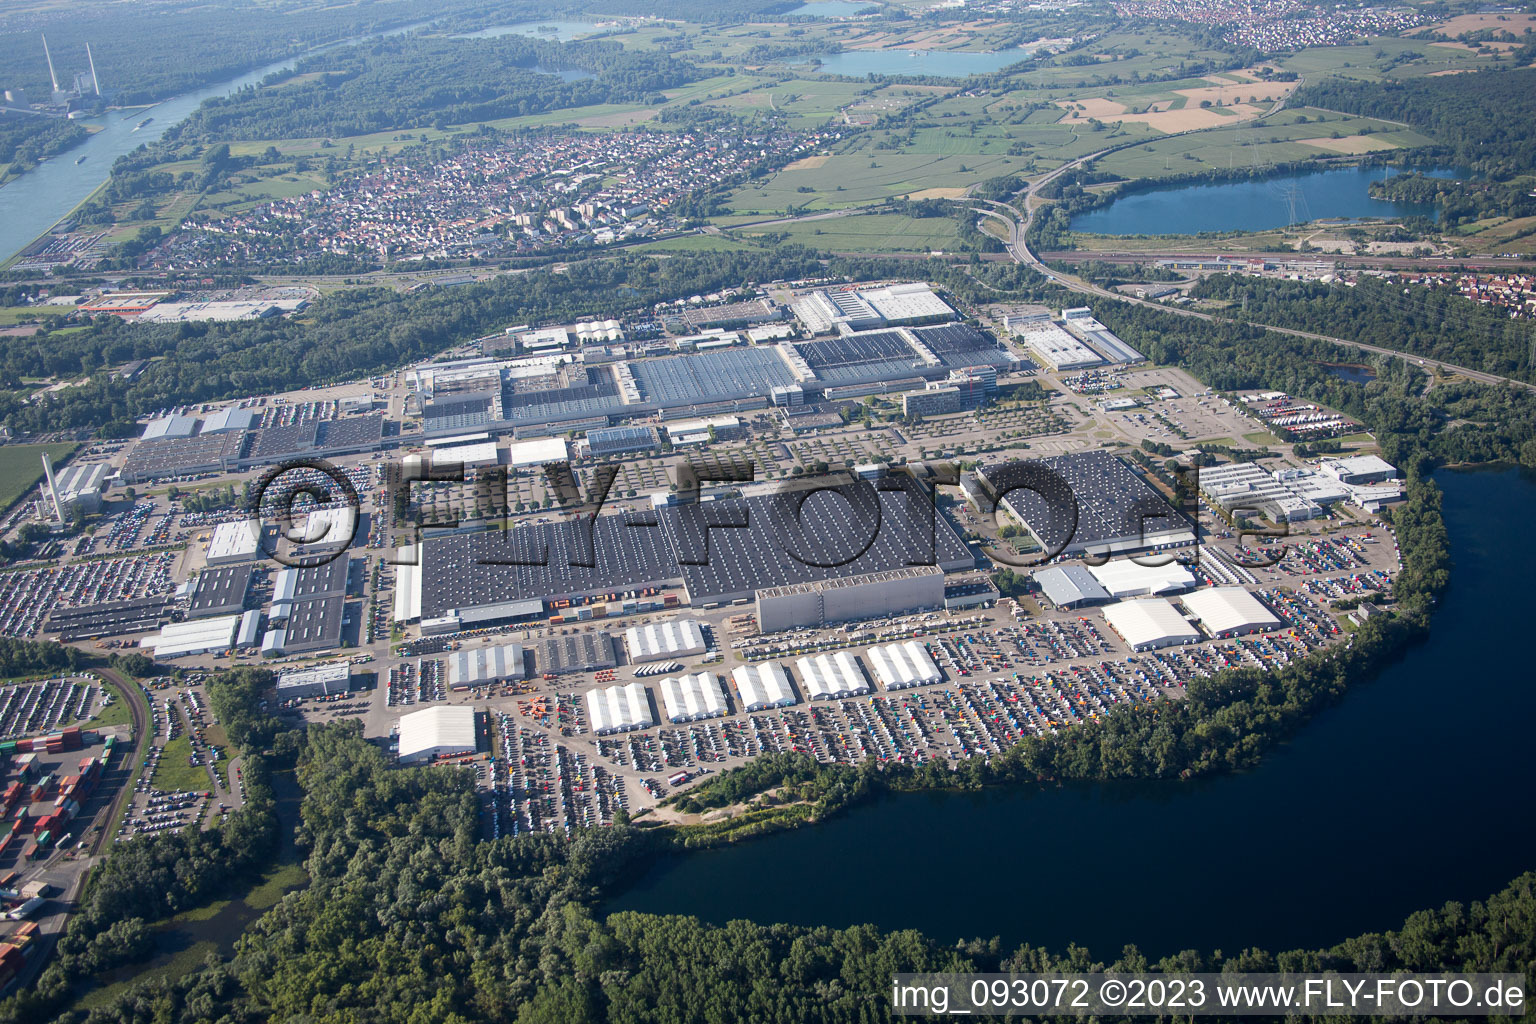 Aerial view of Daimler truck factory in Wörth am Rhein in the state Rhineland-Palatinate, Germany